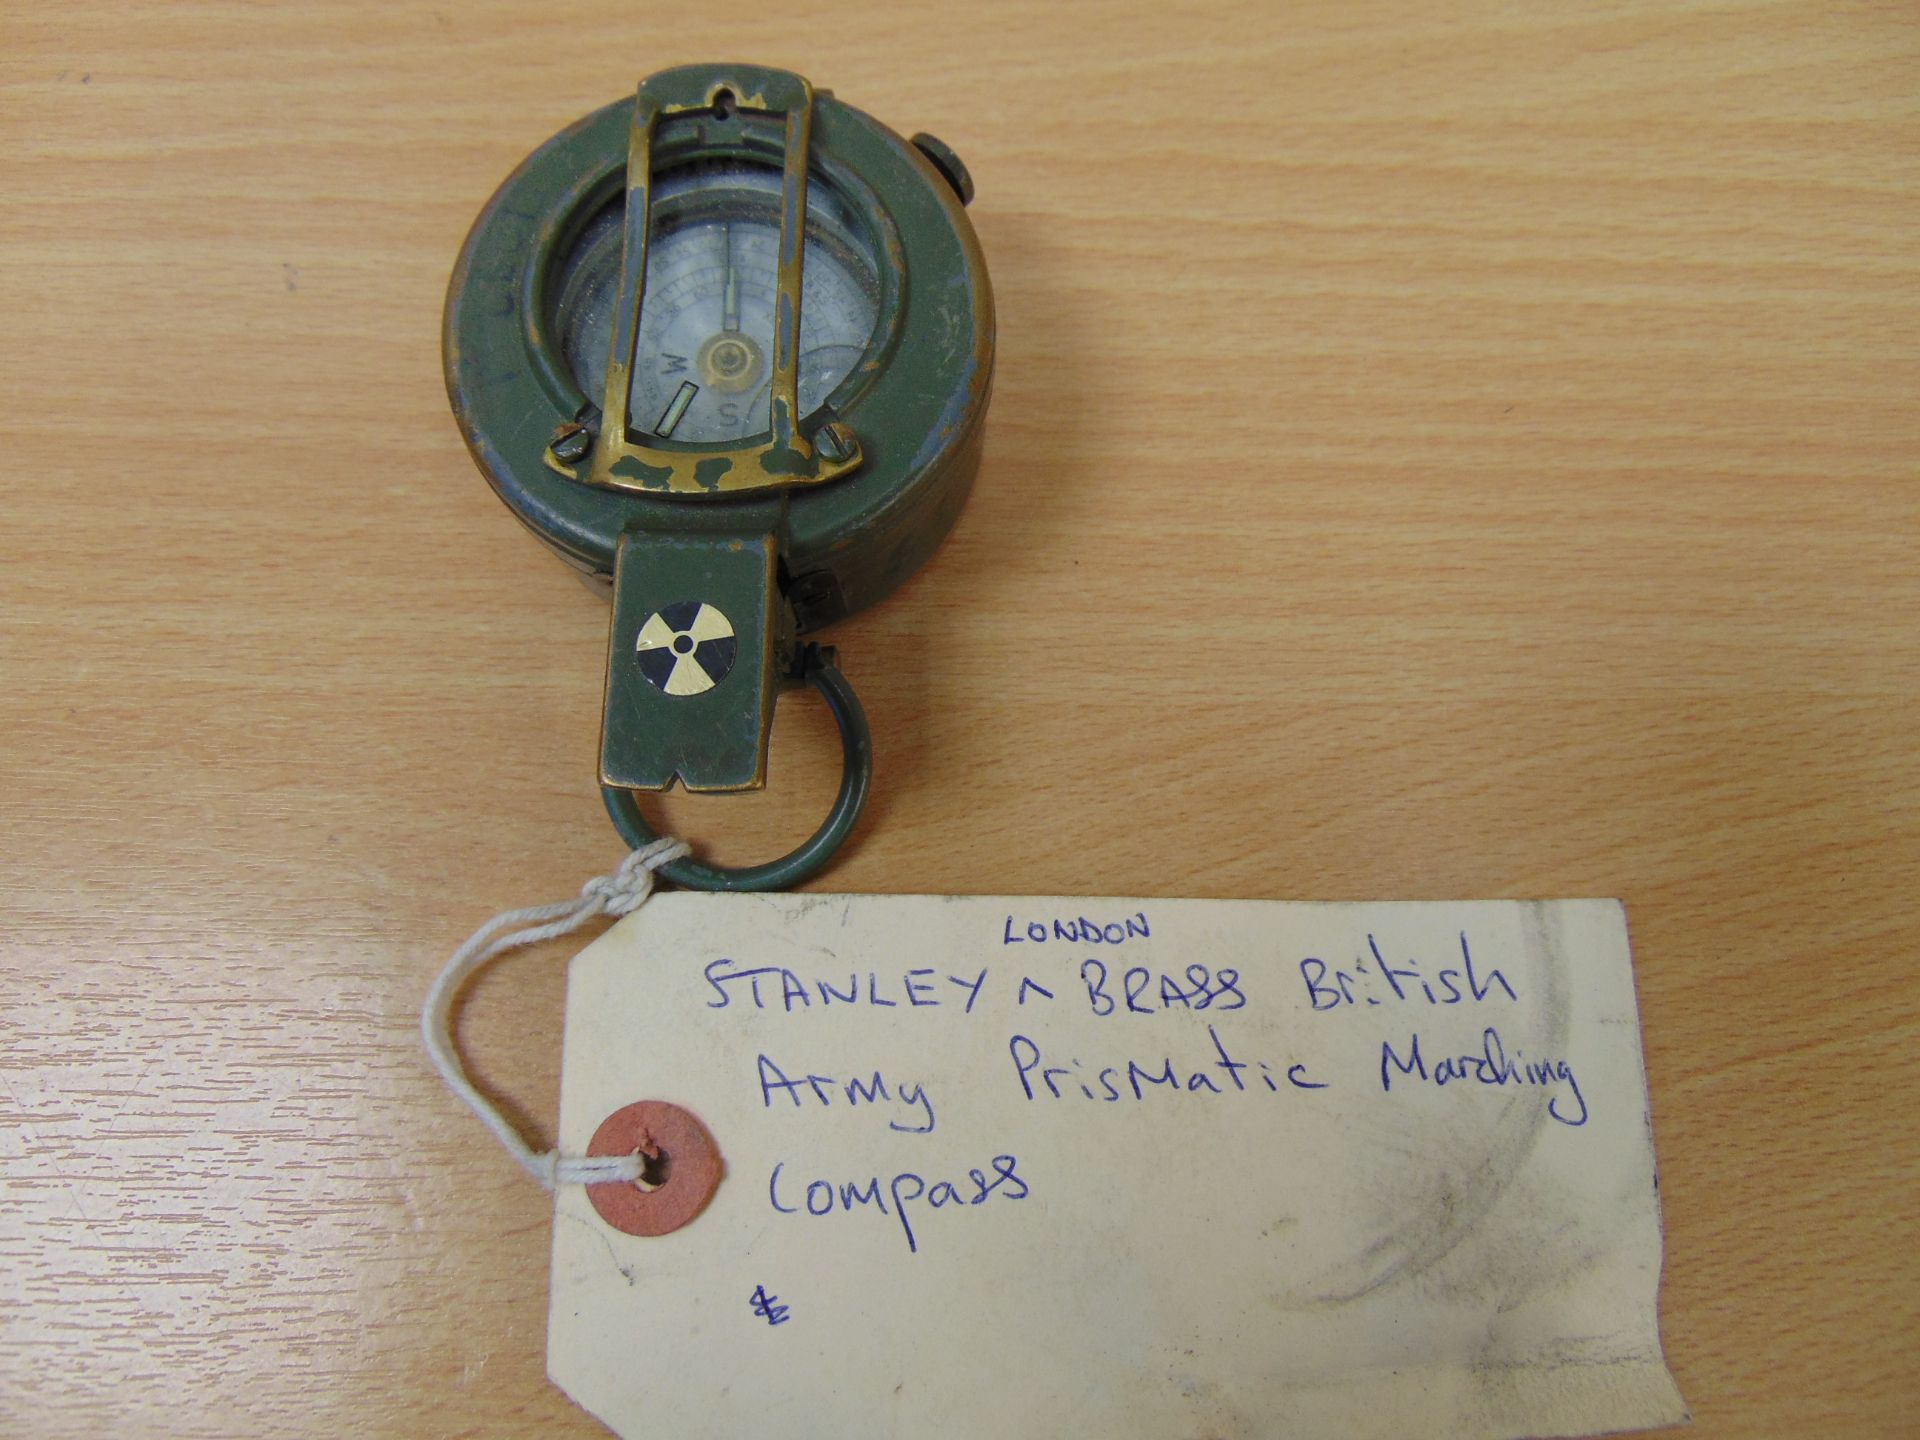 Stanley London Brass Army Prismatic Marching Compass - Image 3 of 3